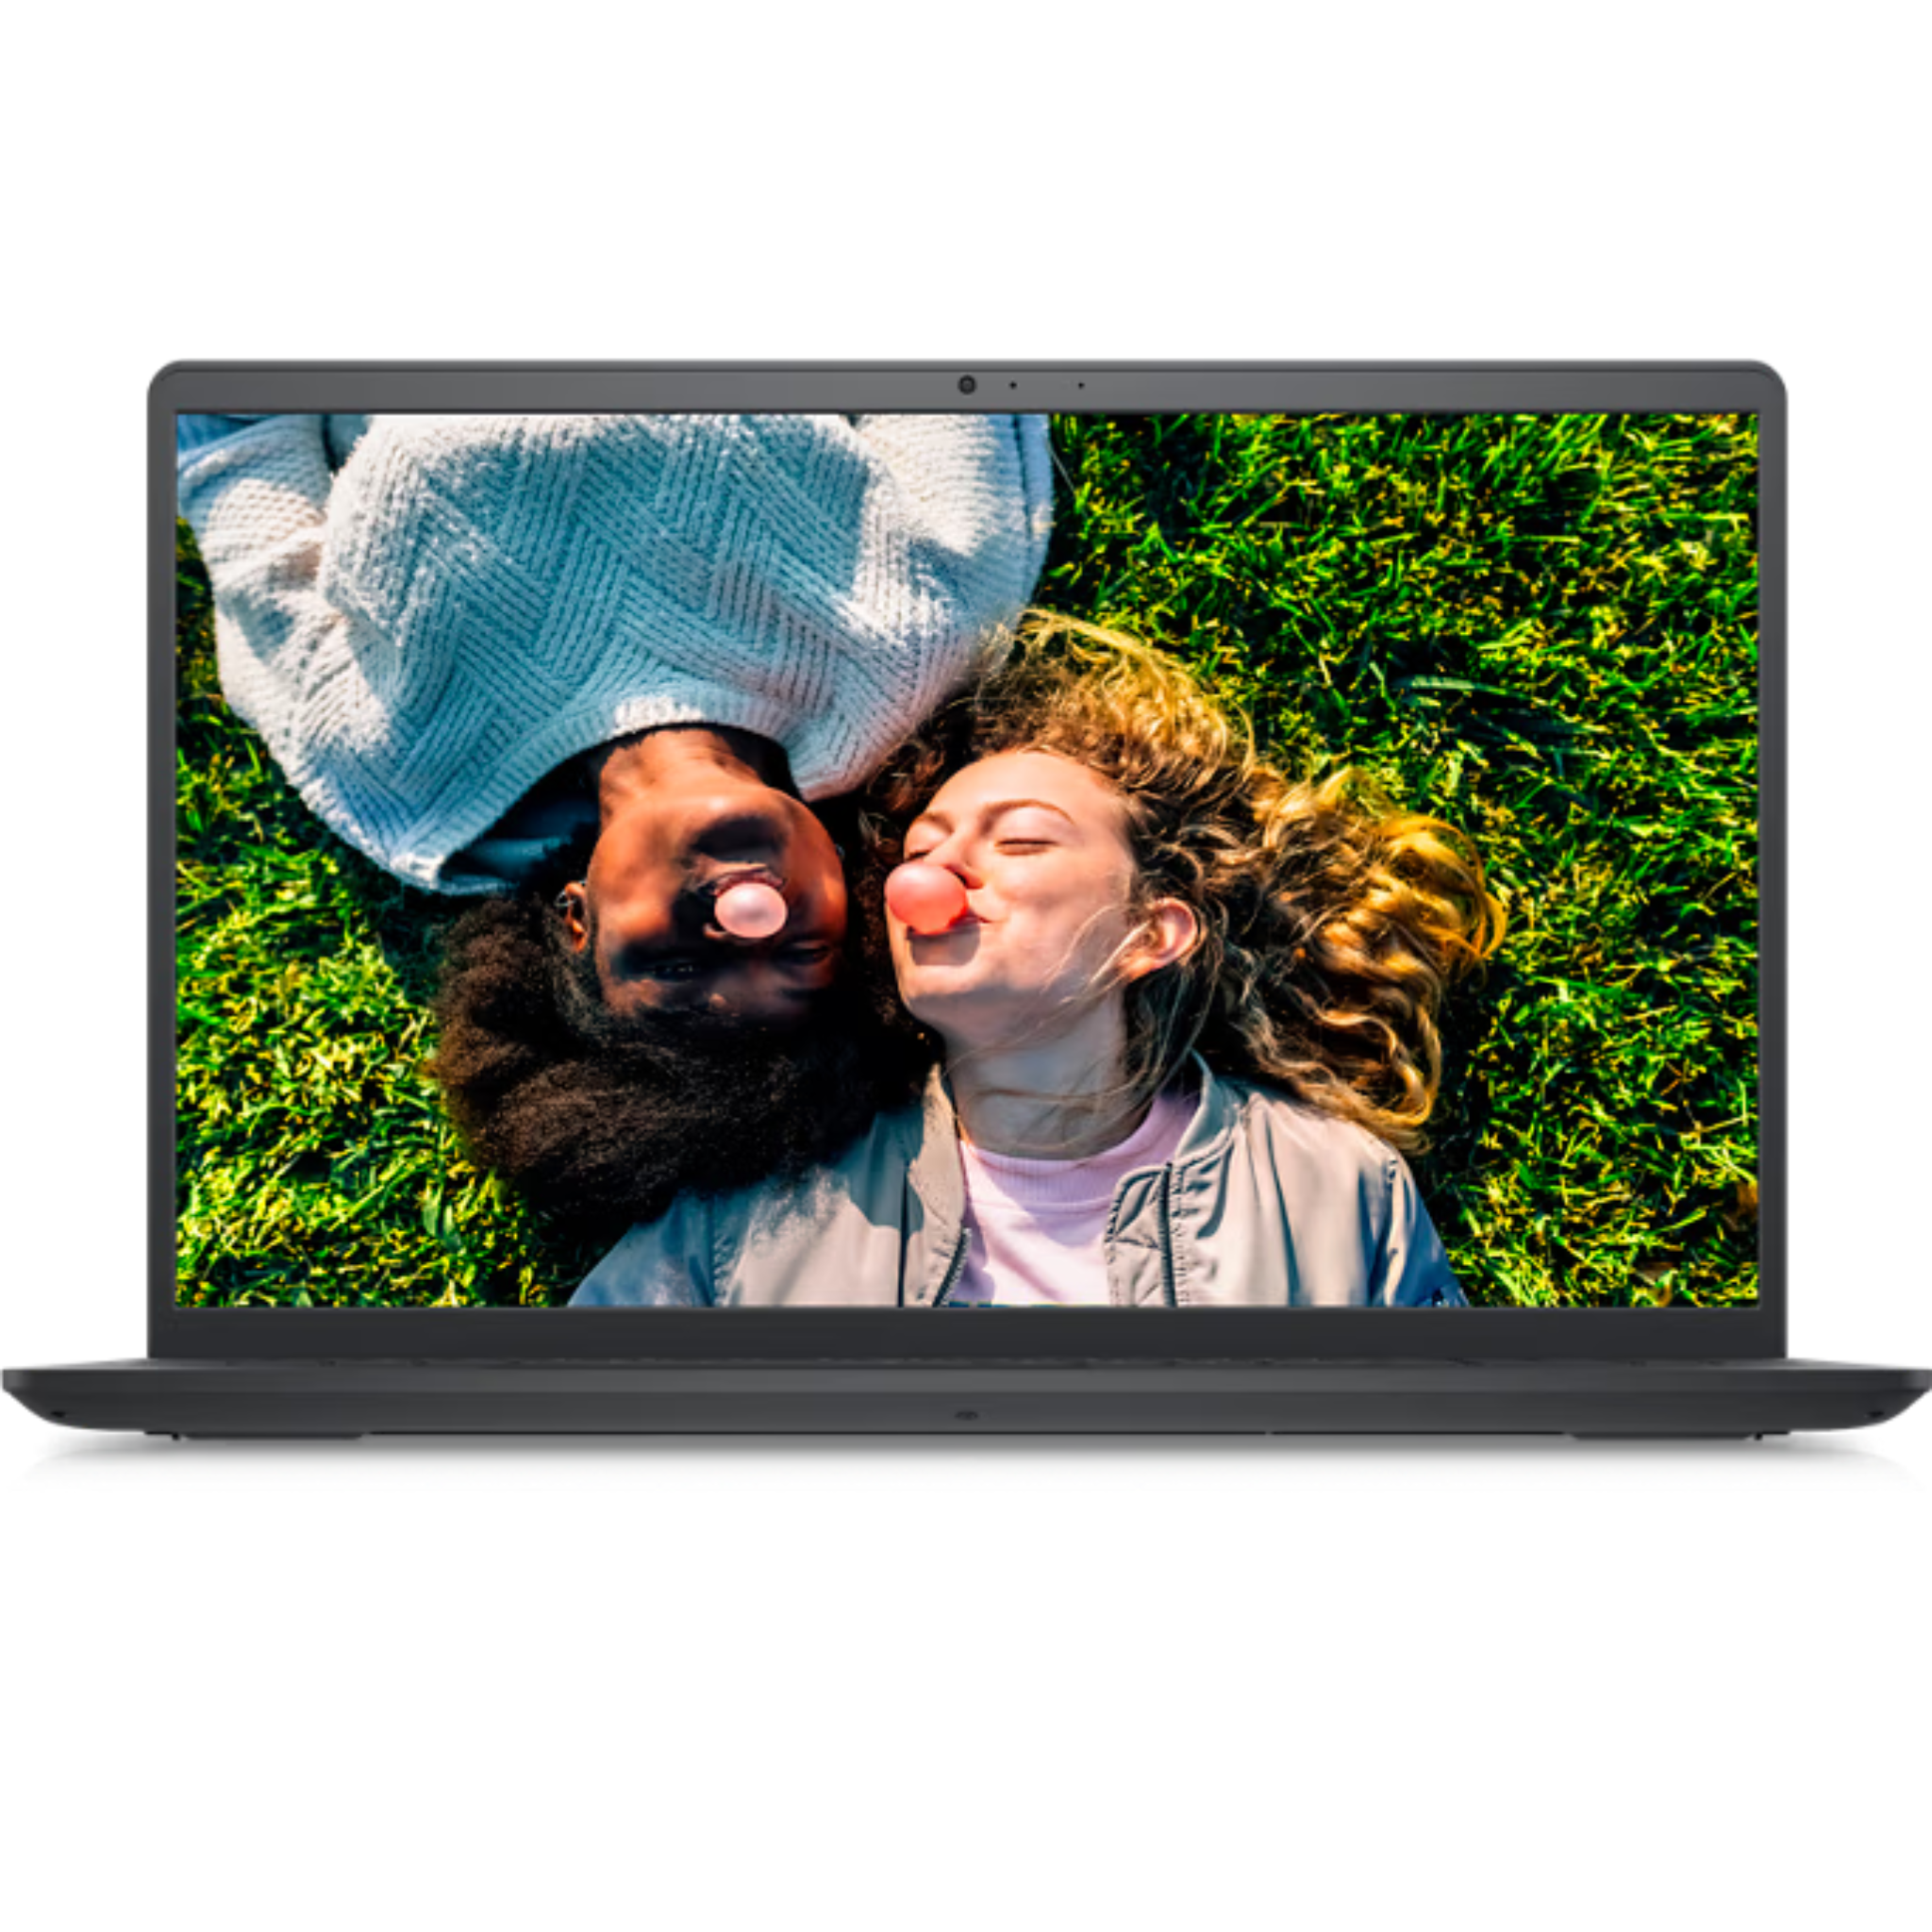 Dell Black Friday in July Sale Is Live